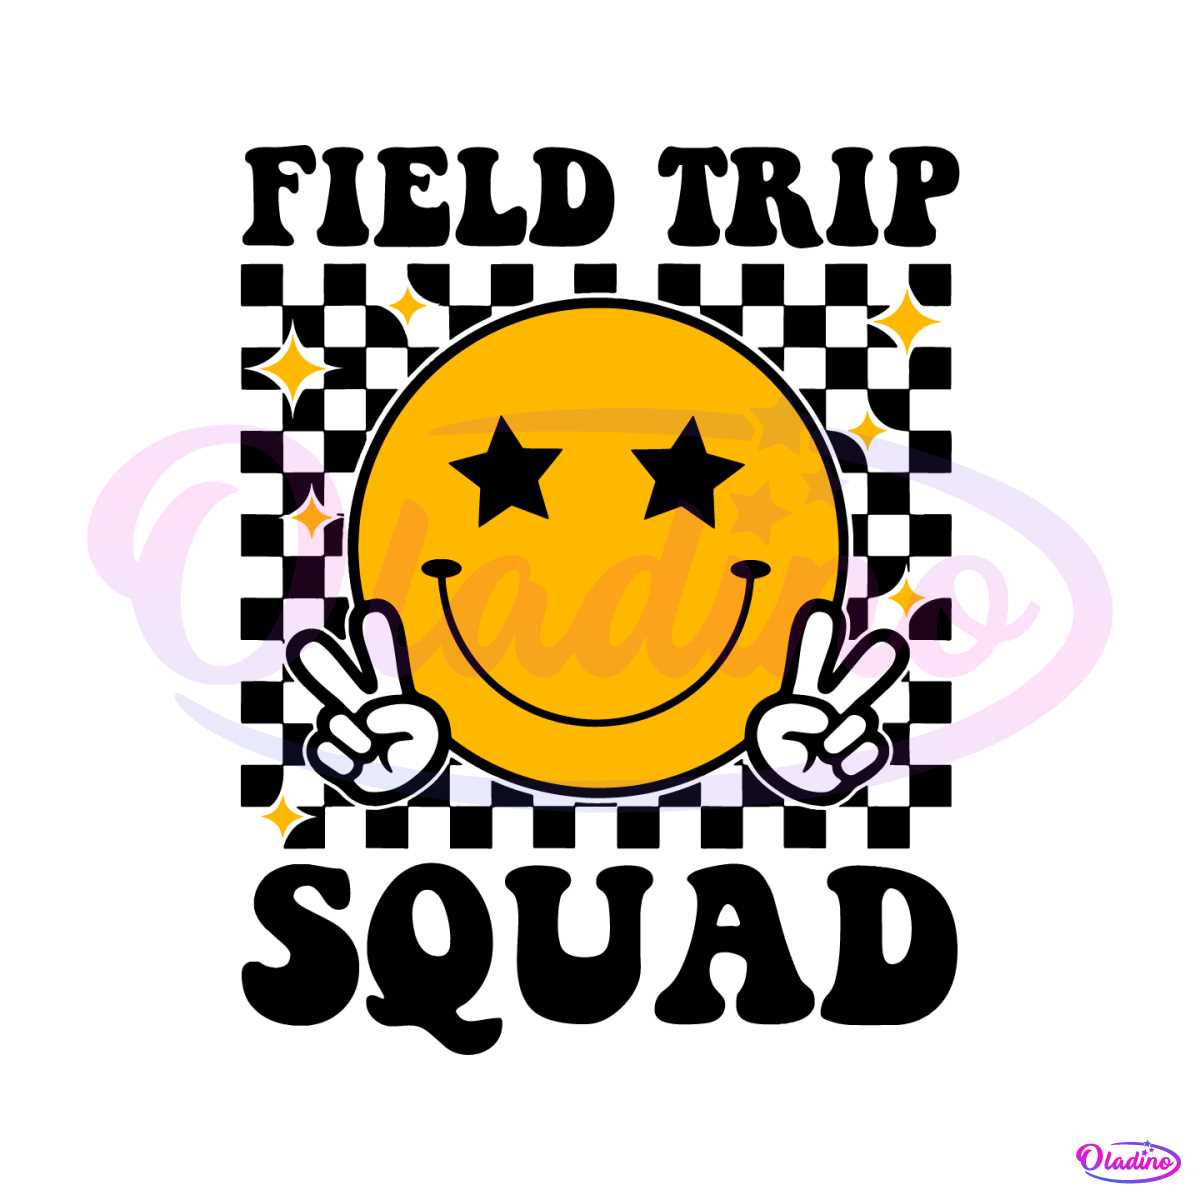 checkered-field-trip-squad-smiley-face-svg